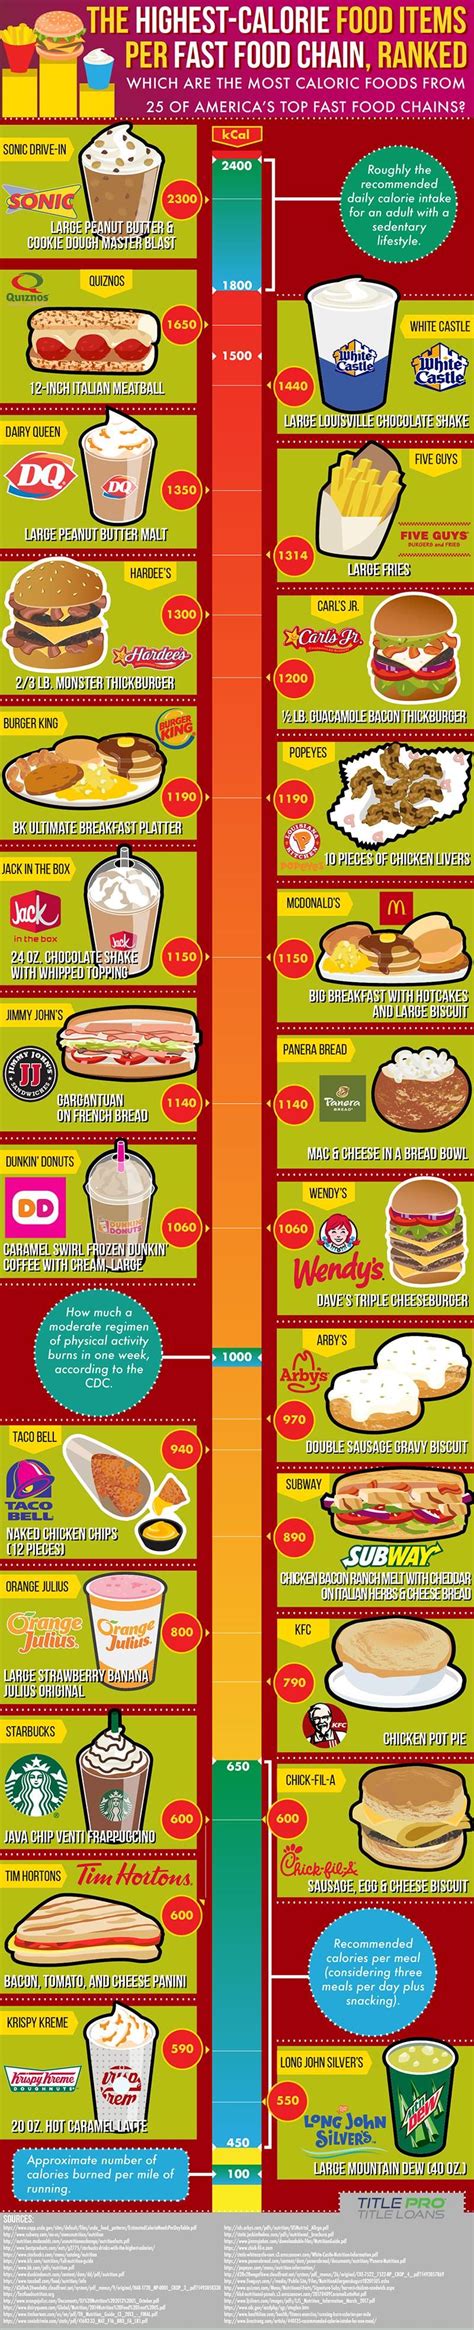 the highest calorie fast food items ranked infographic fast food